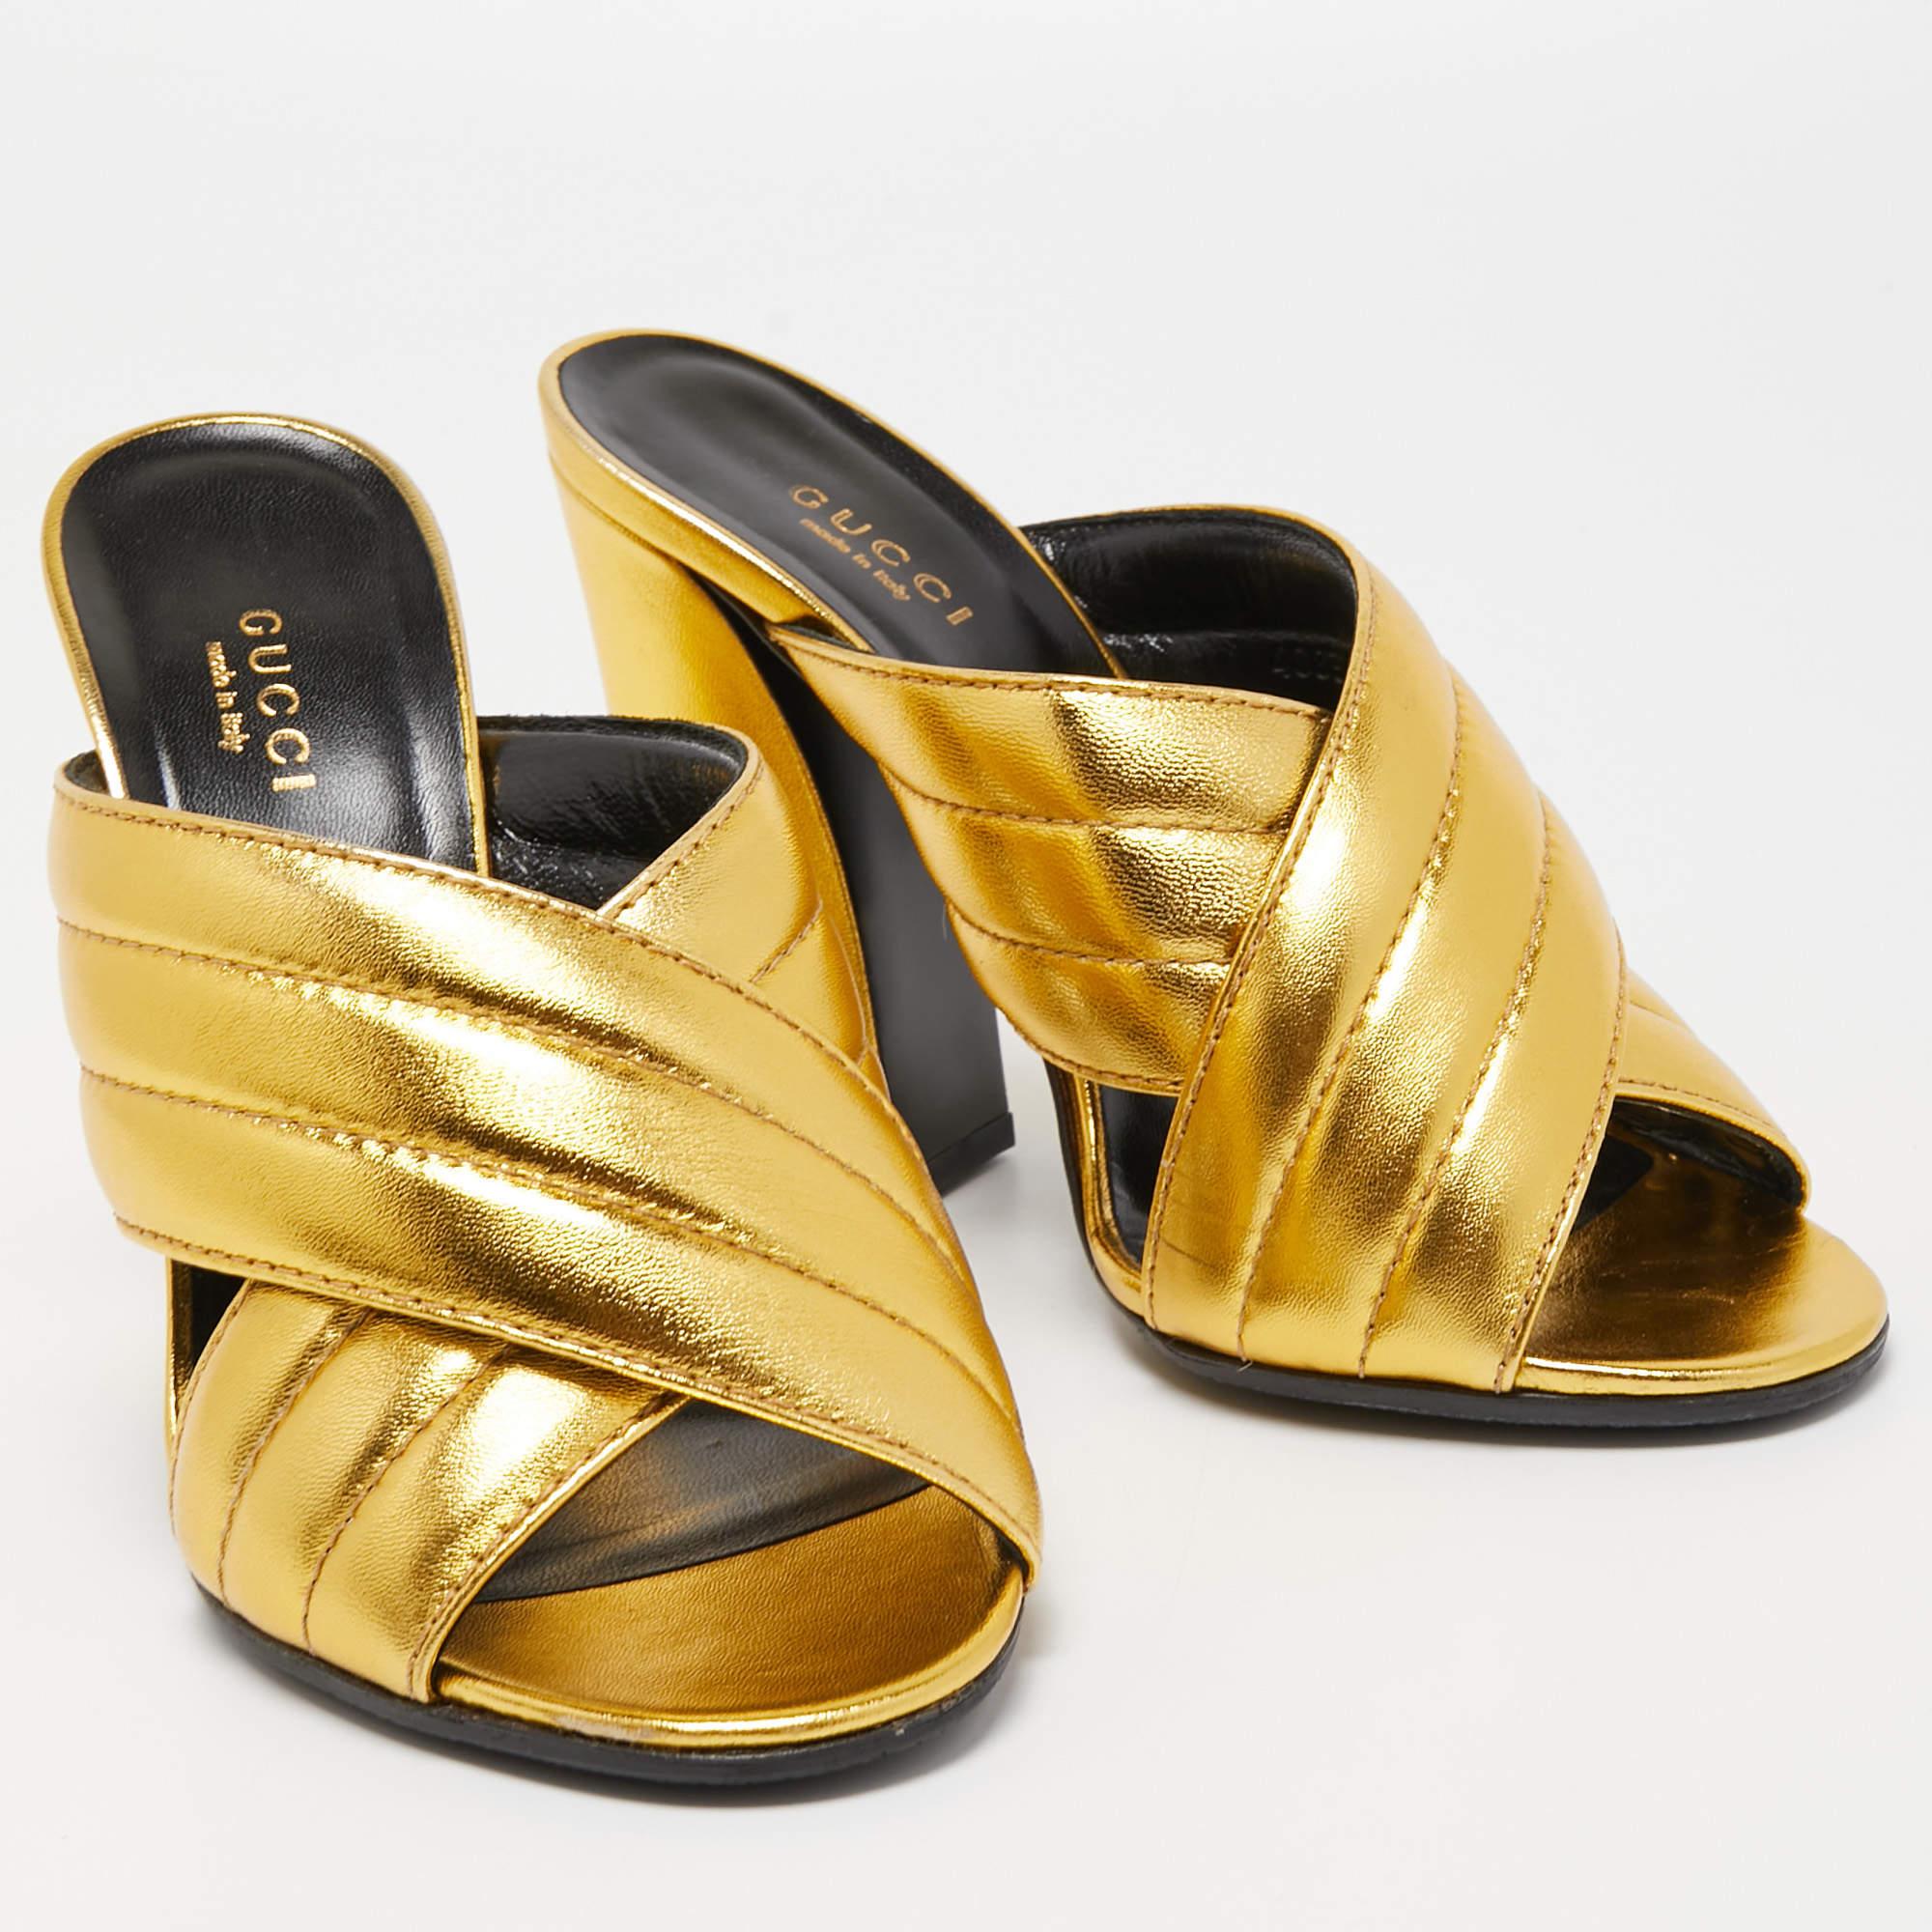 Women's Gucci Gold Leather Webby Cross Strap Slide Sandals Size 37.5